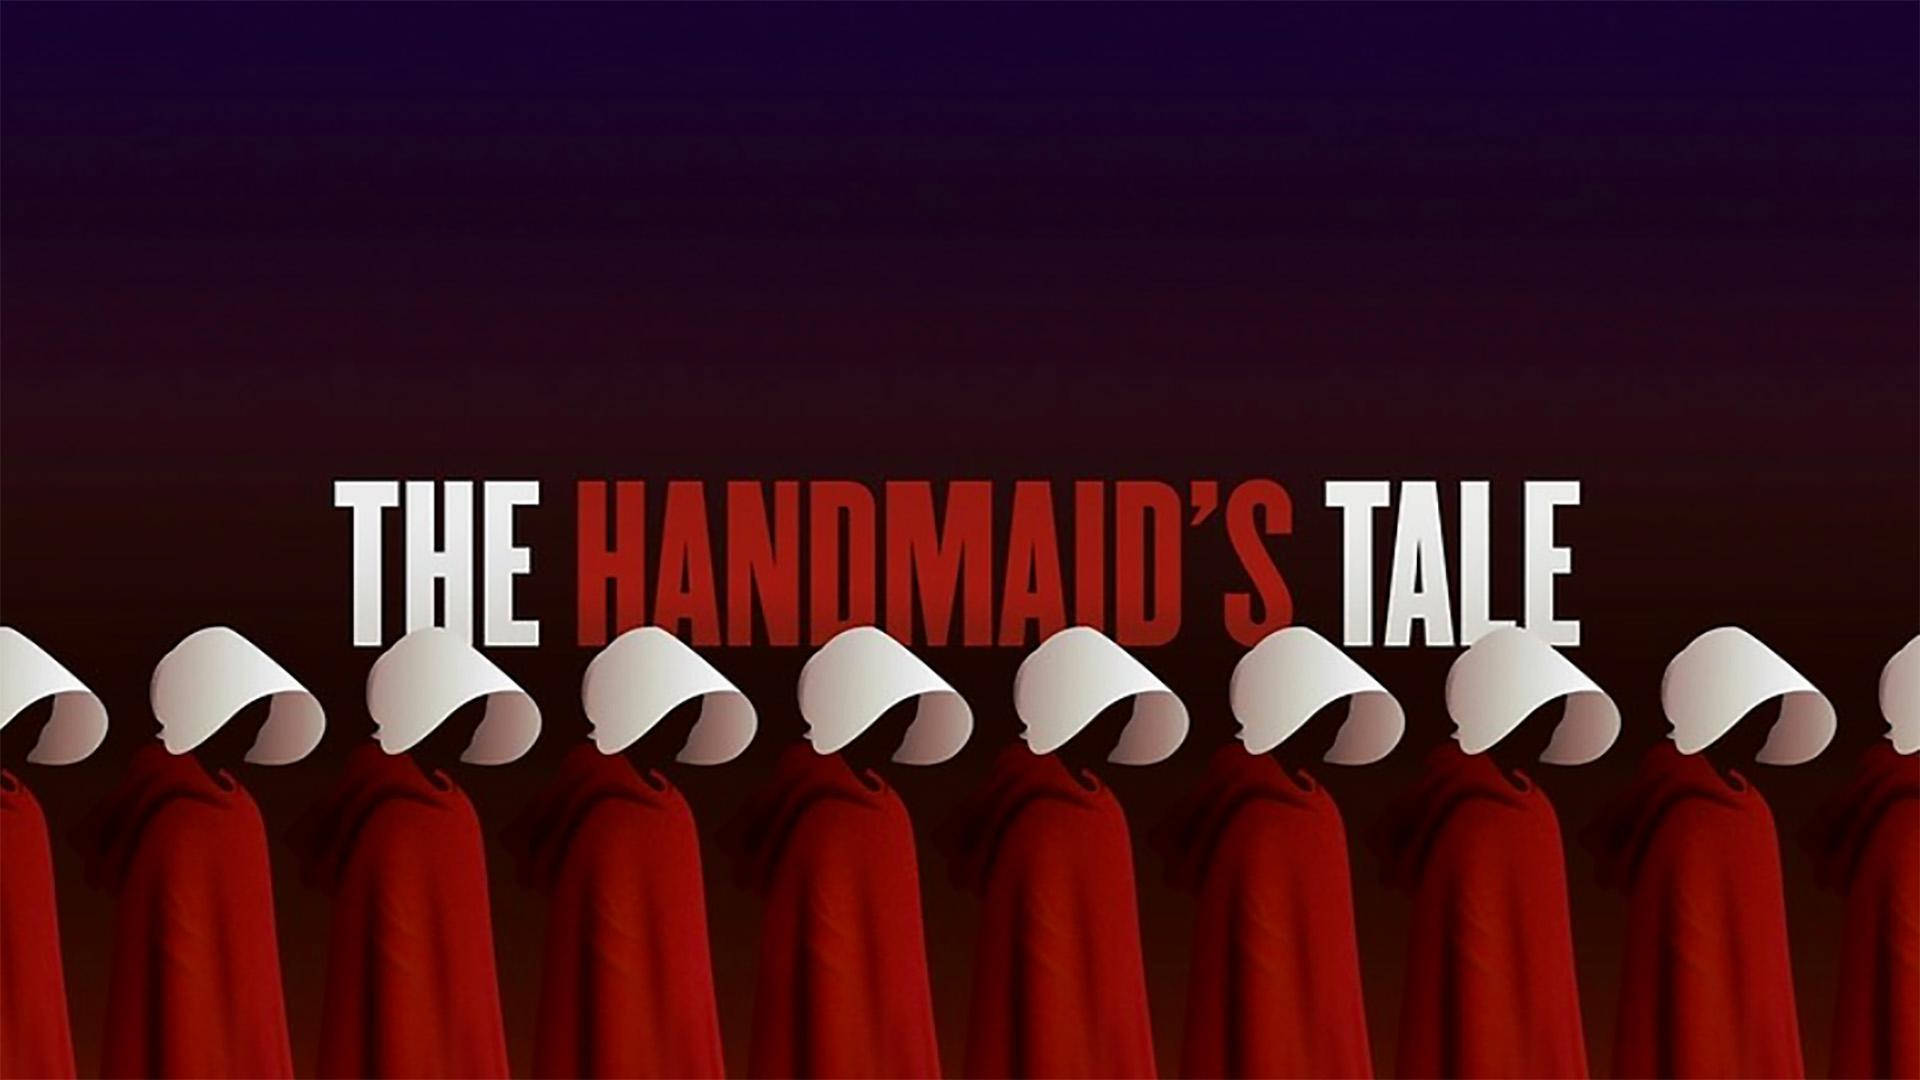 The Handmaid's Tale Background Wallpaper